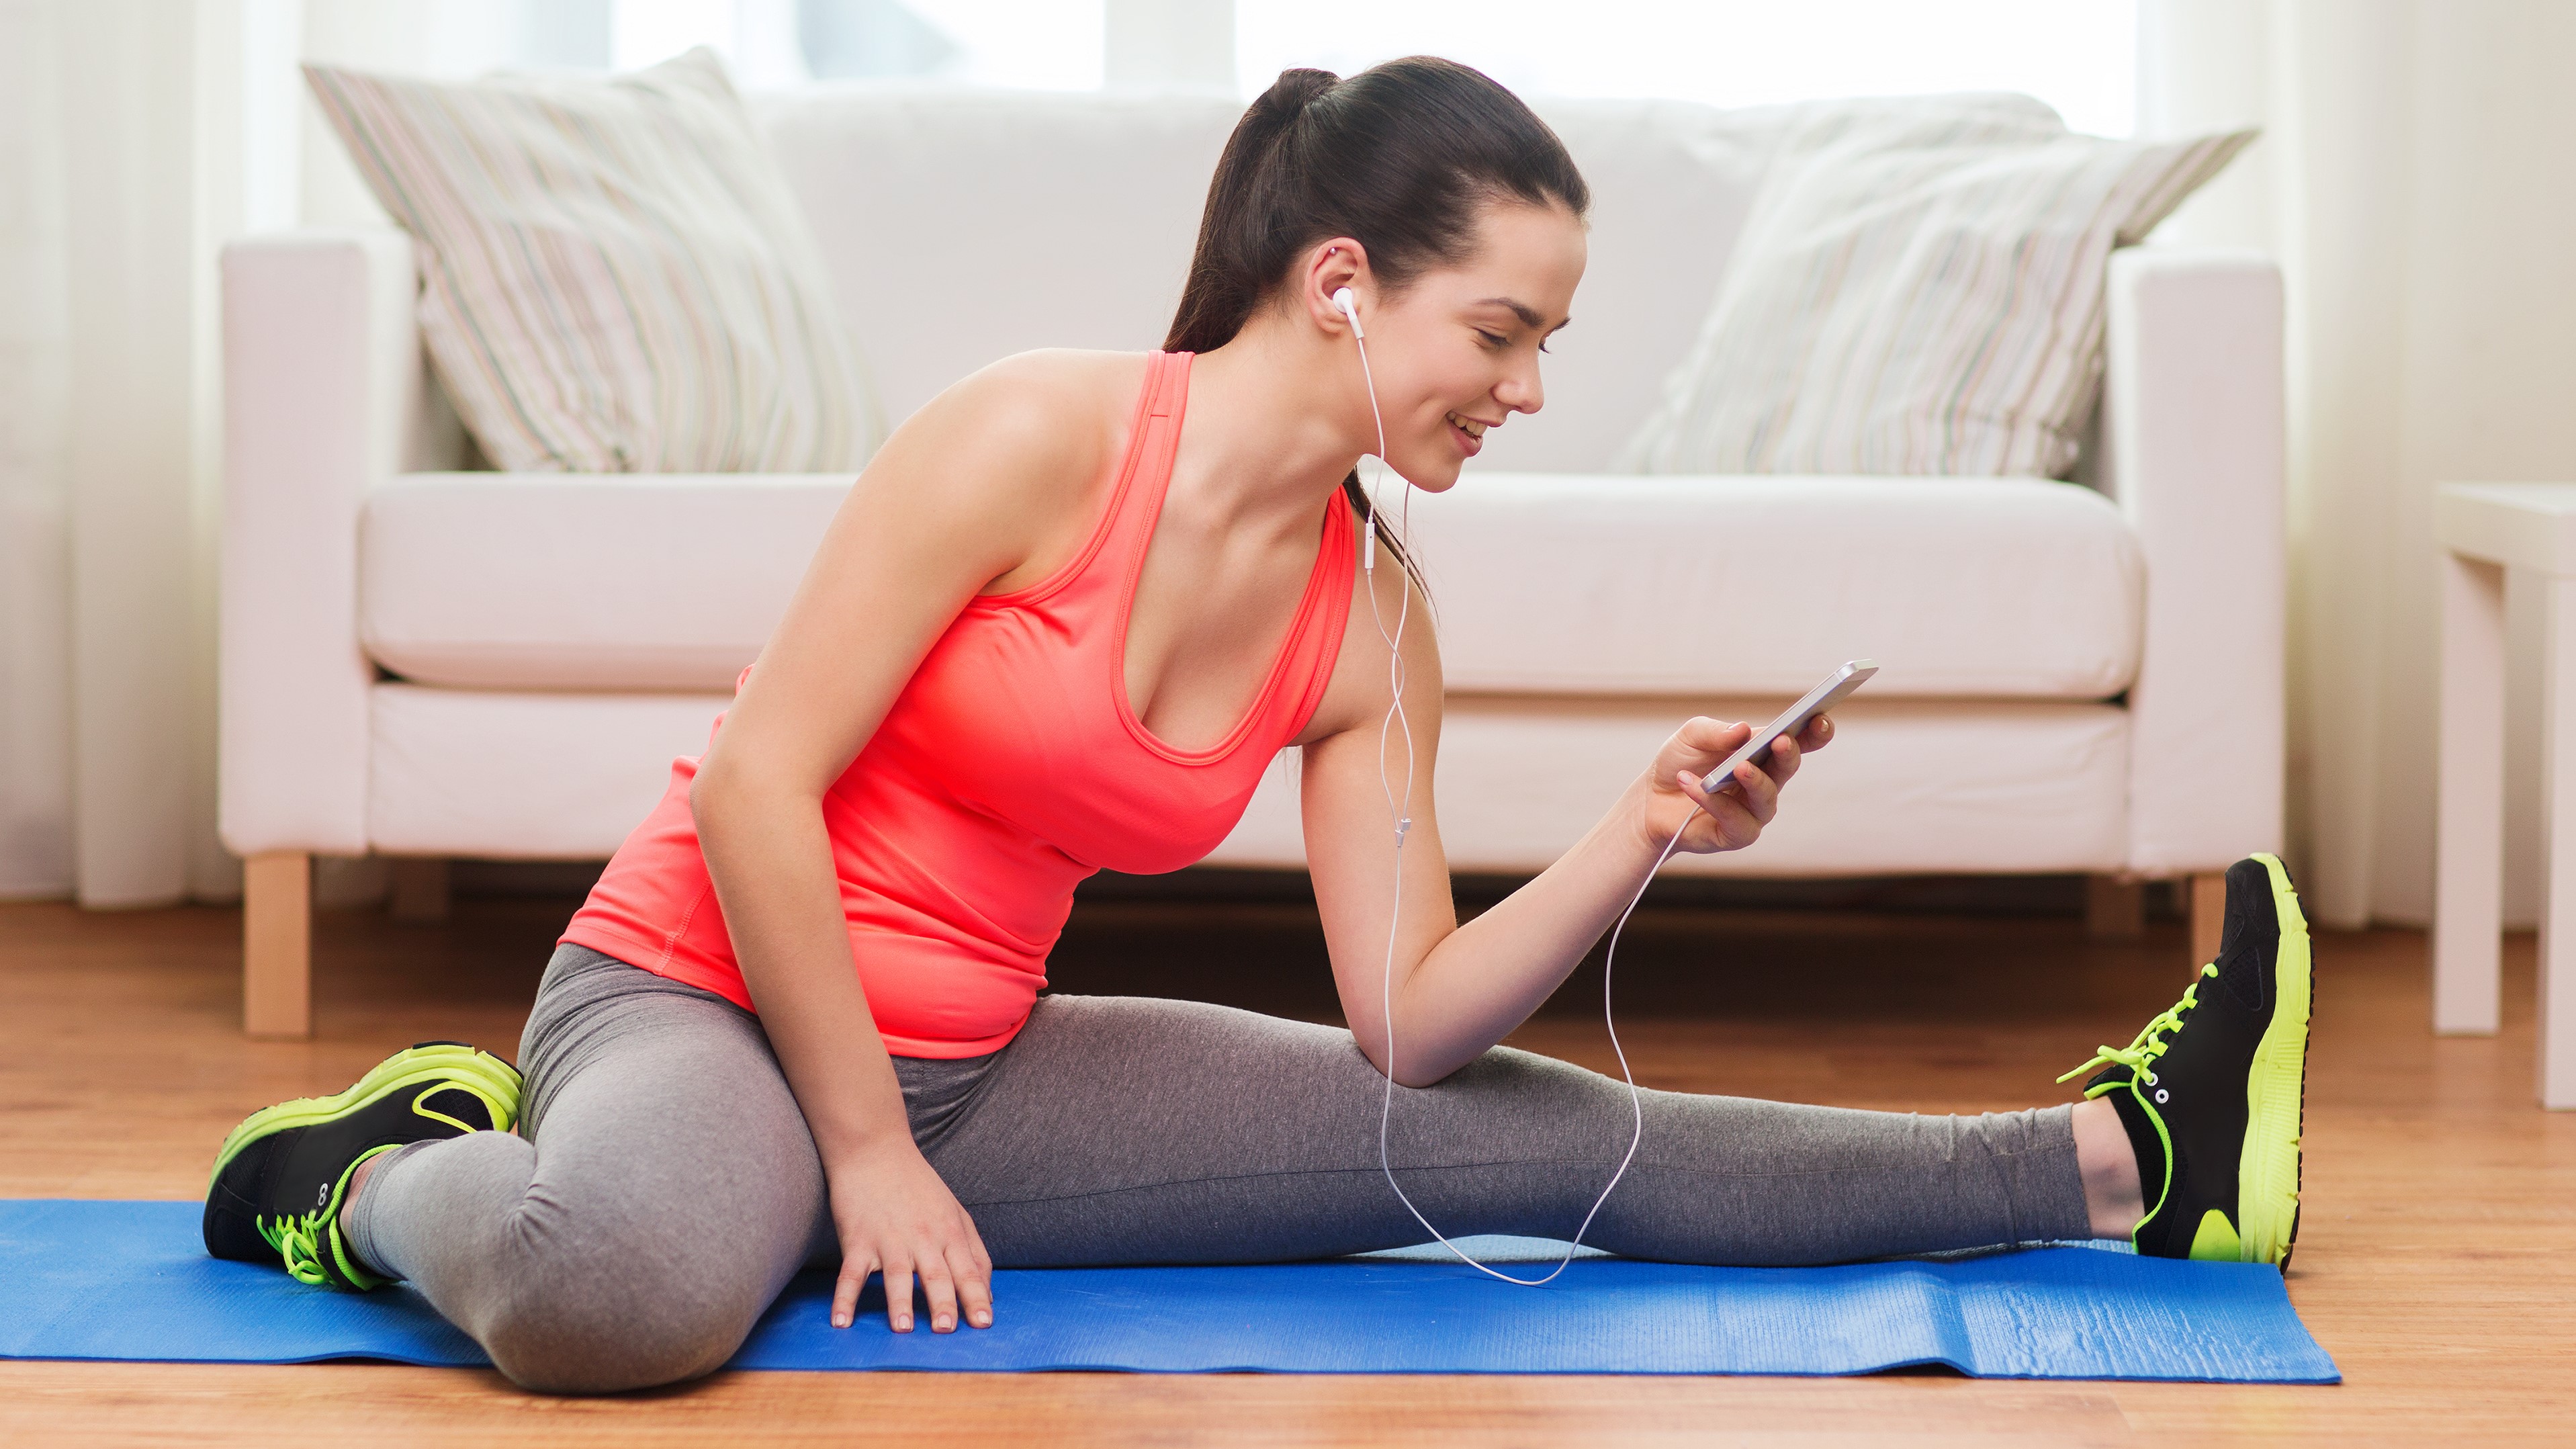 Home workout apps